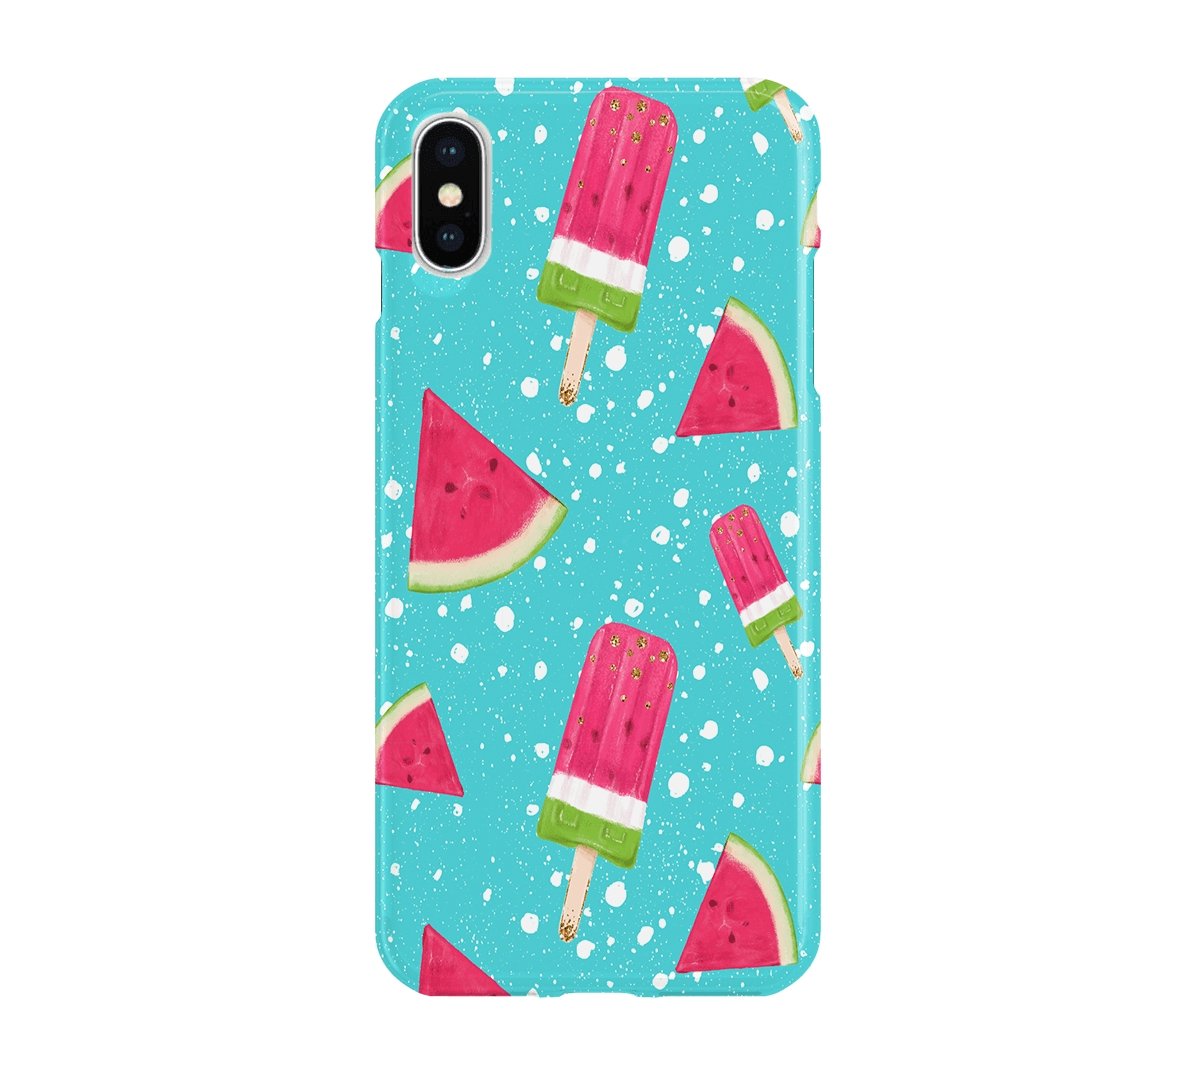 Watermelon Popsicle - iPhone